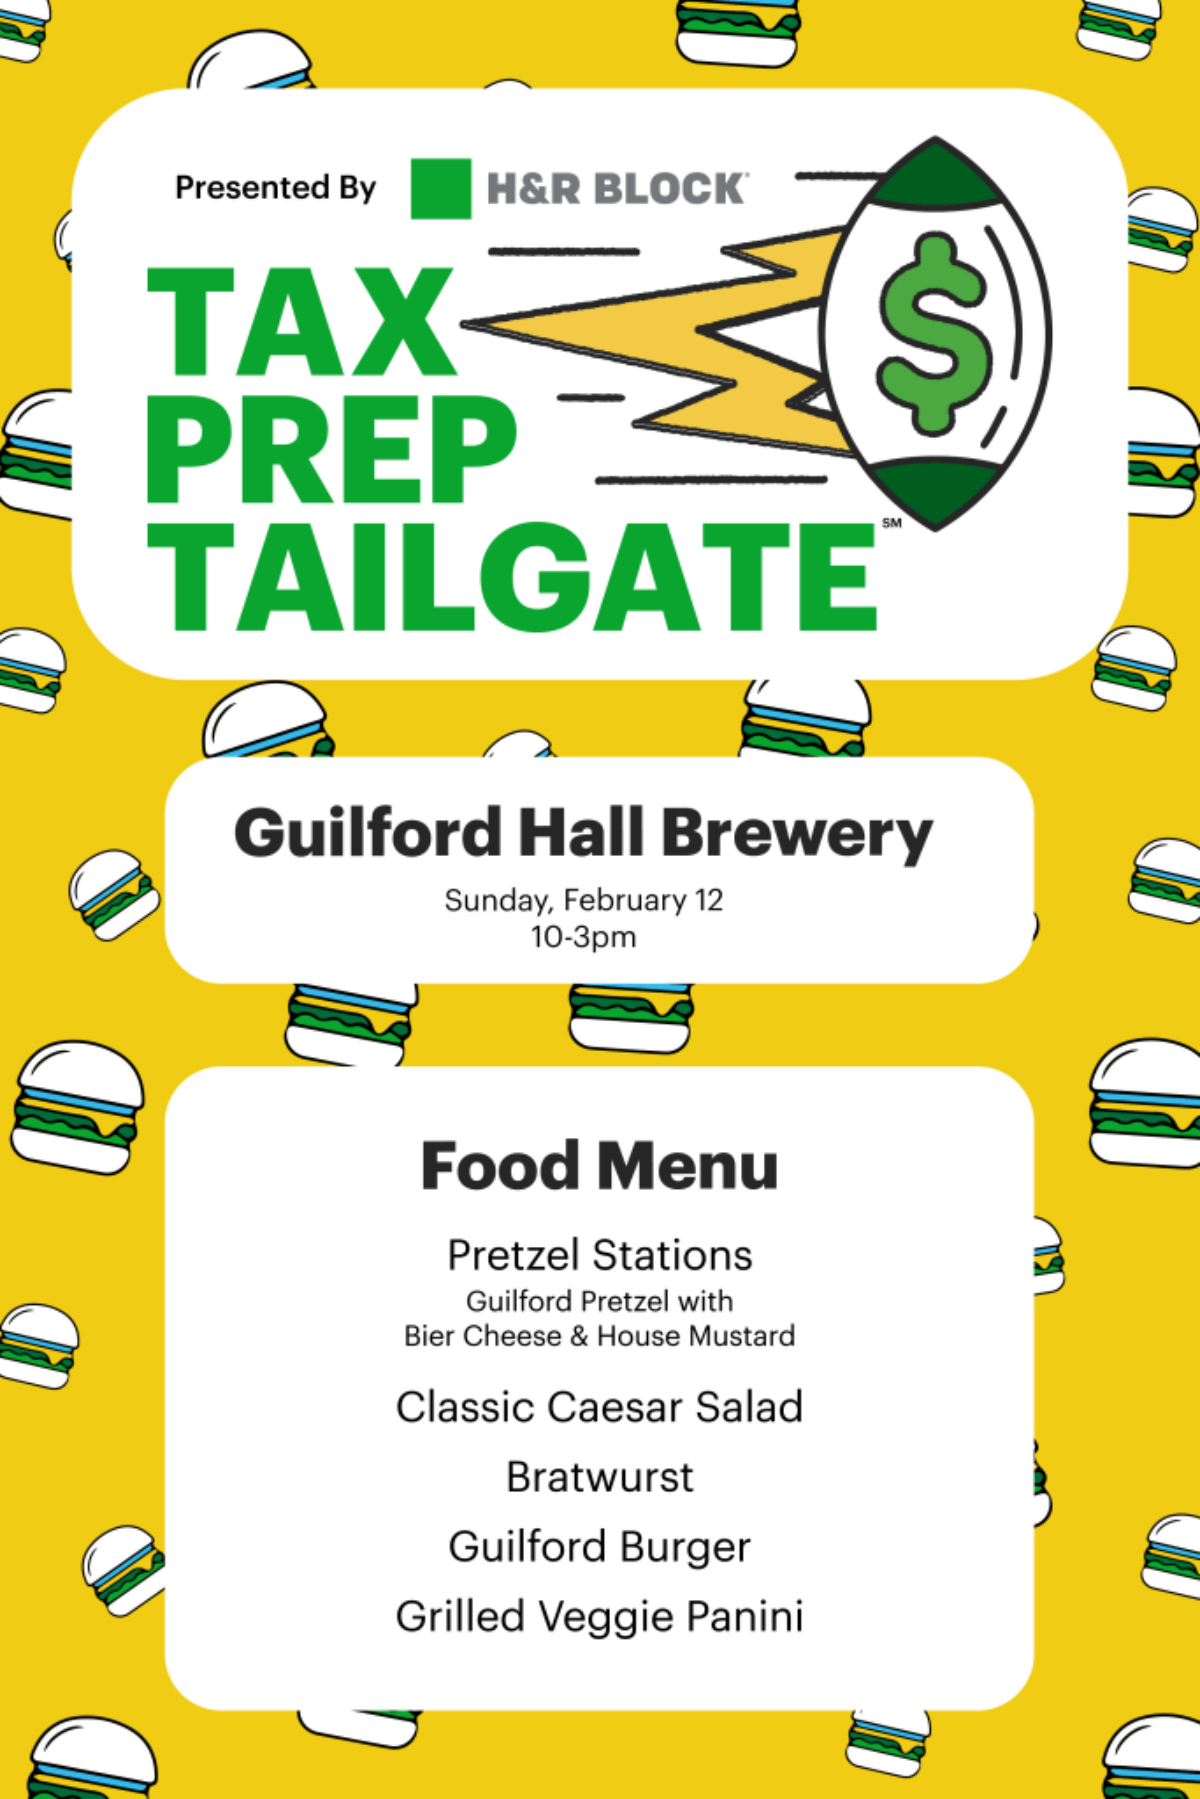 H&R Block's Tax Prep Tailgate at Guilford Hall